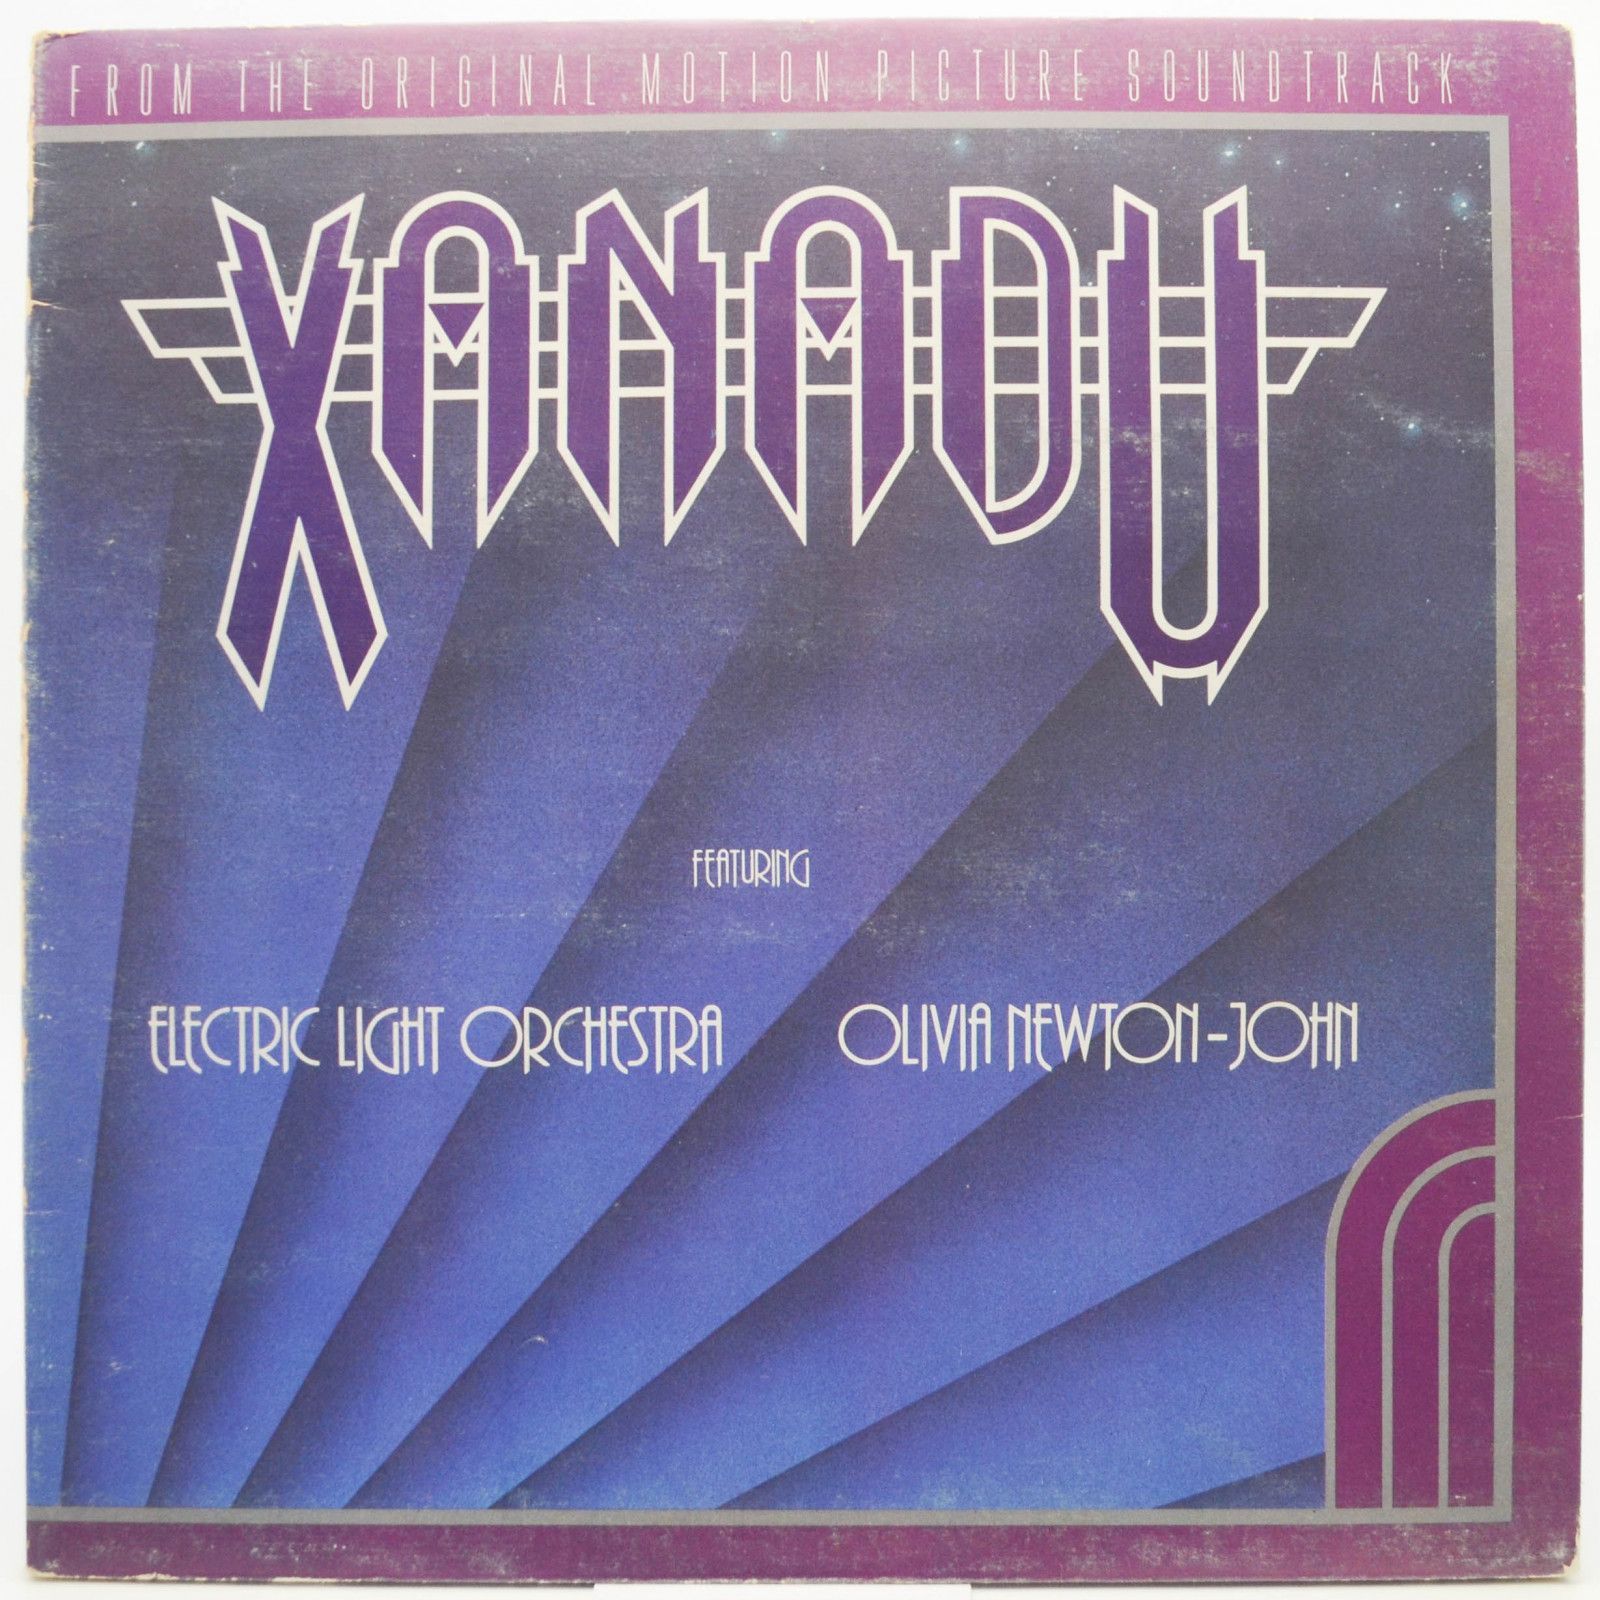 Electric Light Orchestra / Olivia Newton-John — Xanadu (From The Original Motion Picture Soundtrack), 1980